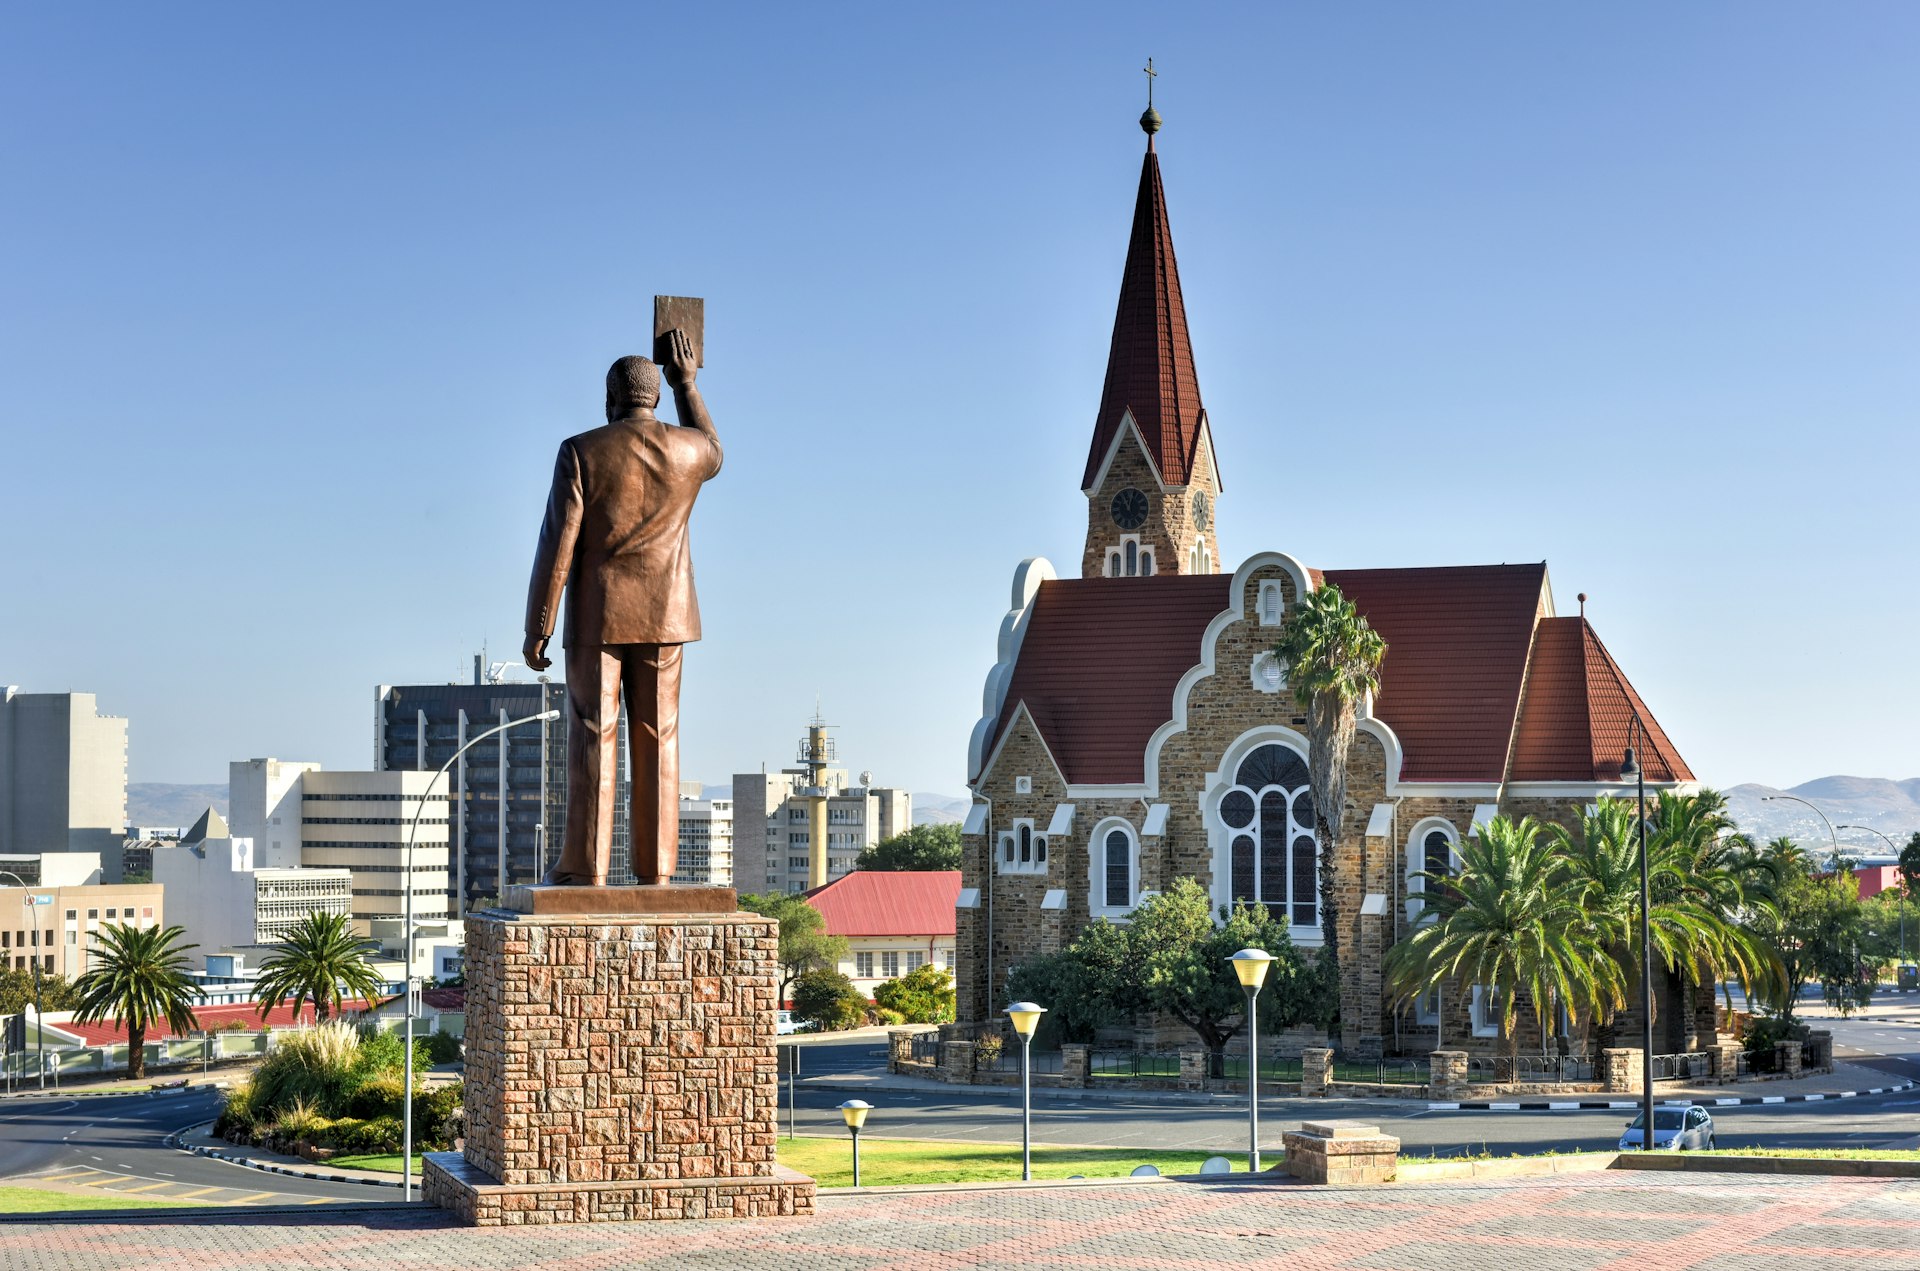 A city with a church and a large statue